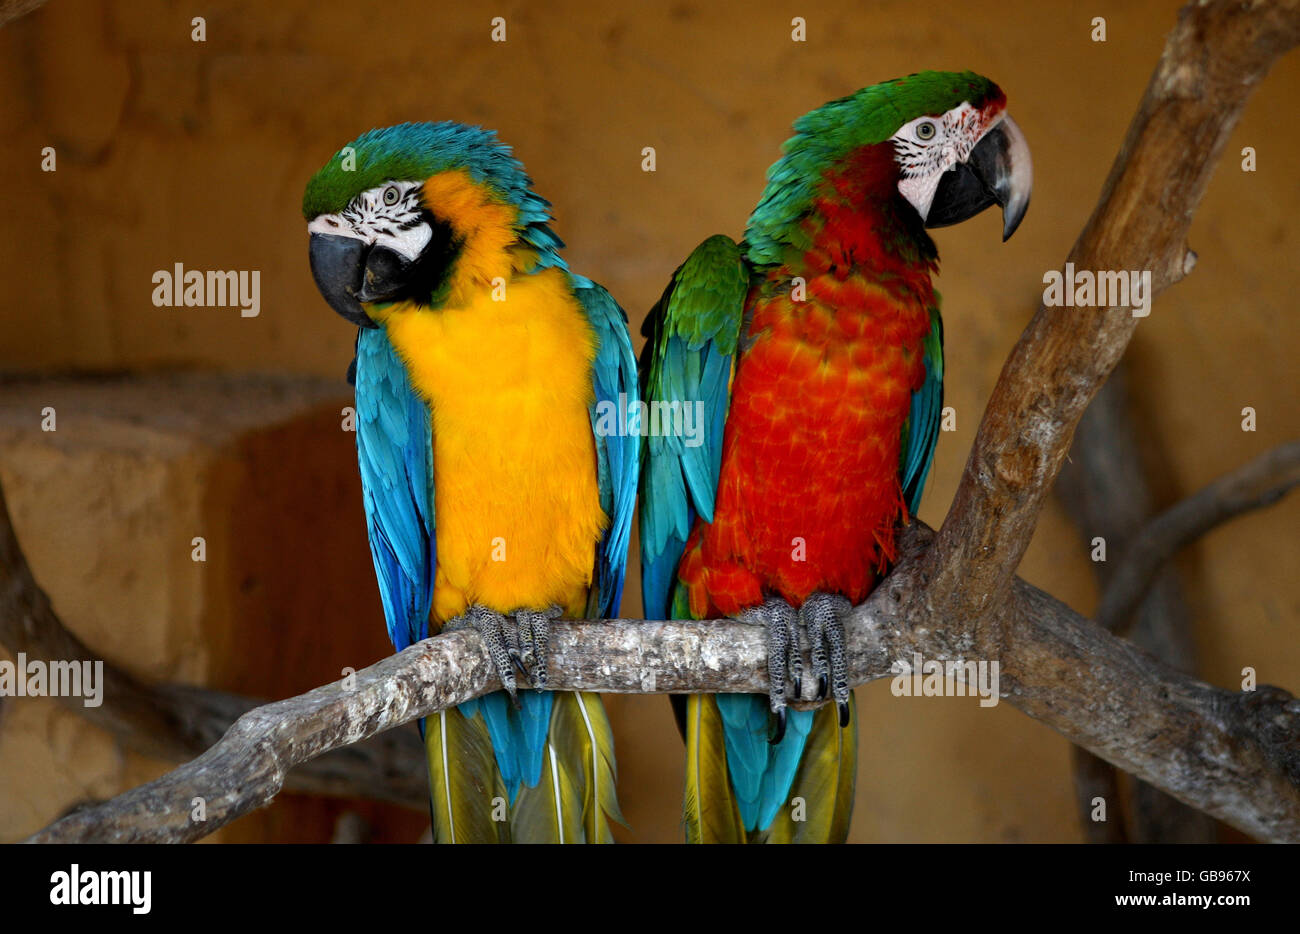 A Blue and Gold Macaw (left) and a Harlequin Macaw (right) at a safari park near Nantes, France. Stock Photo